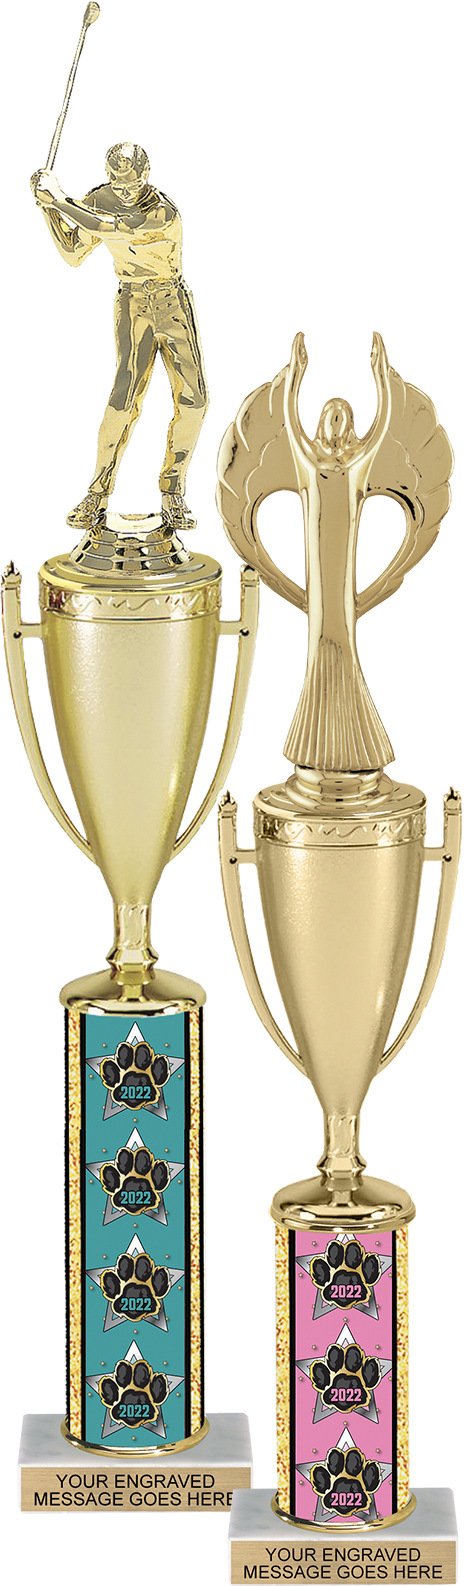 Exclusive 2022 Paw Cup Trophies